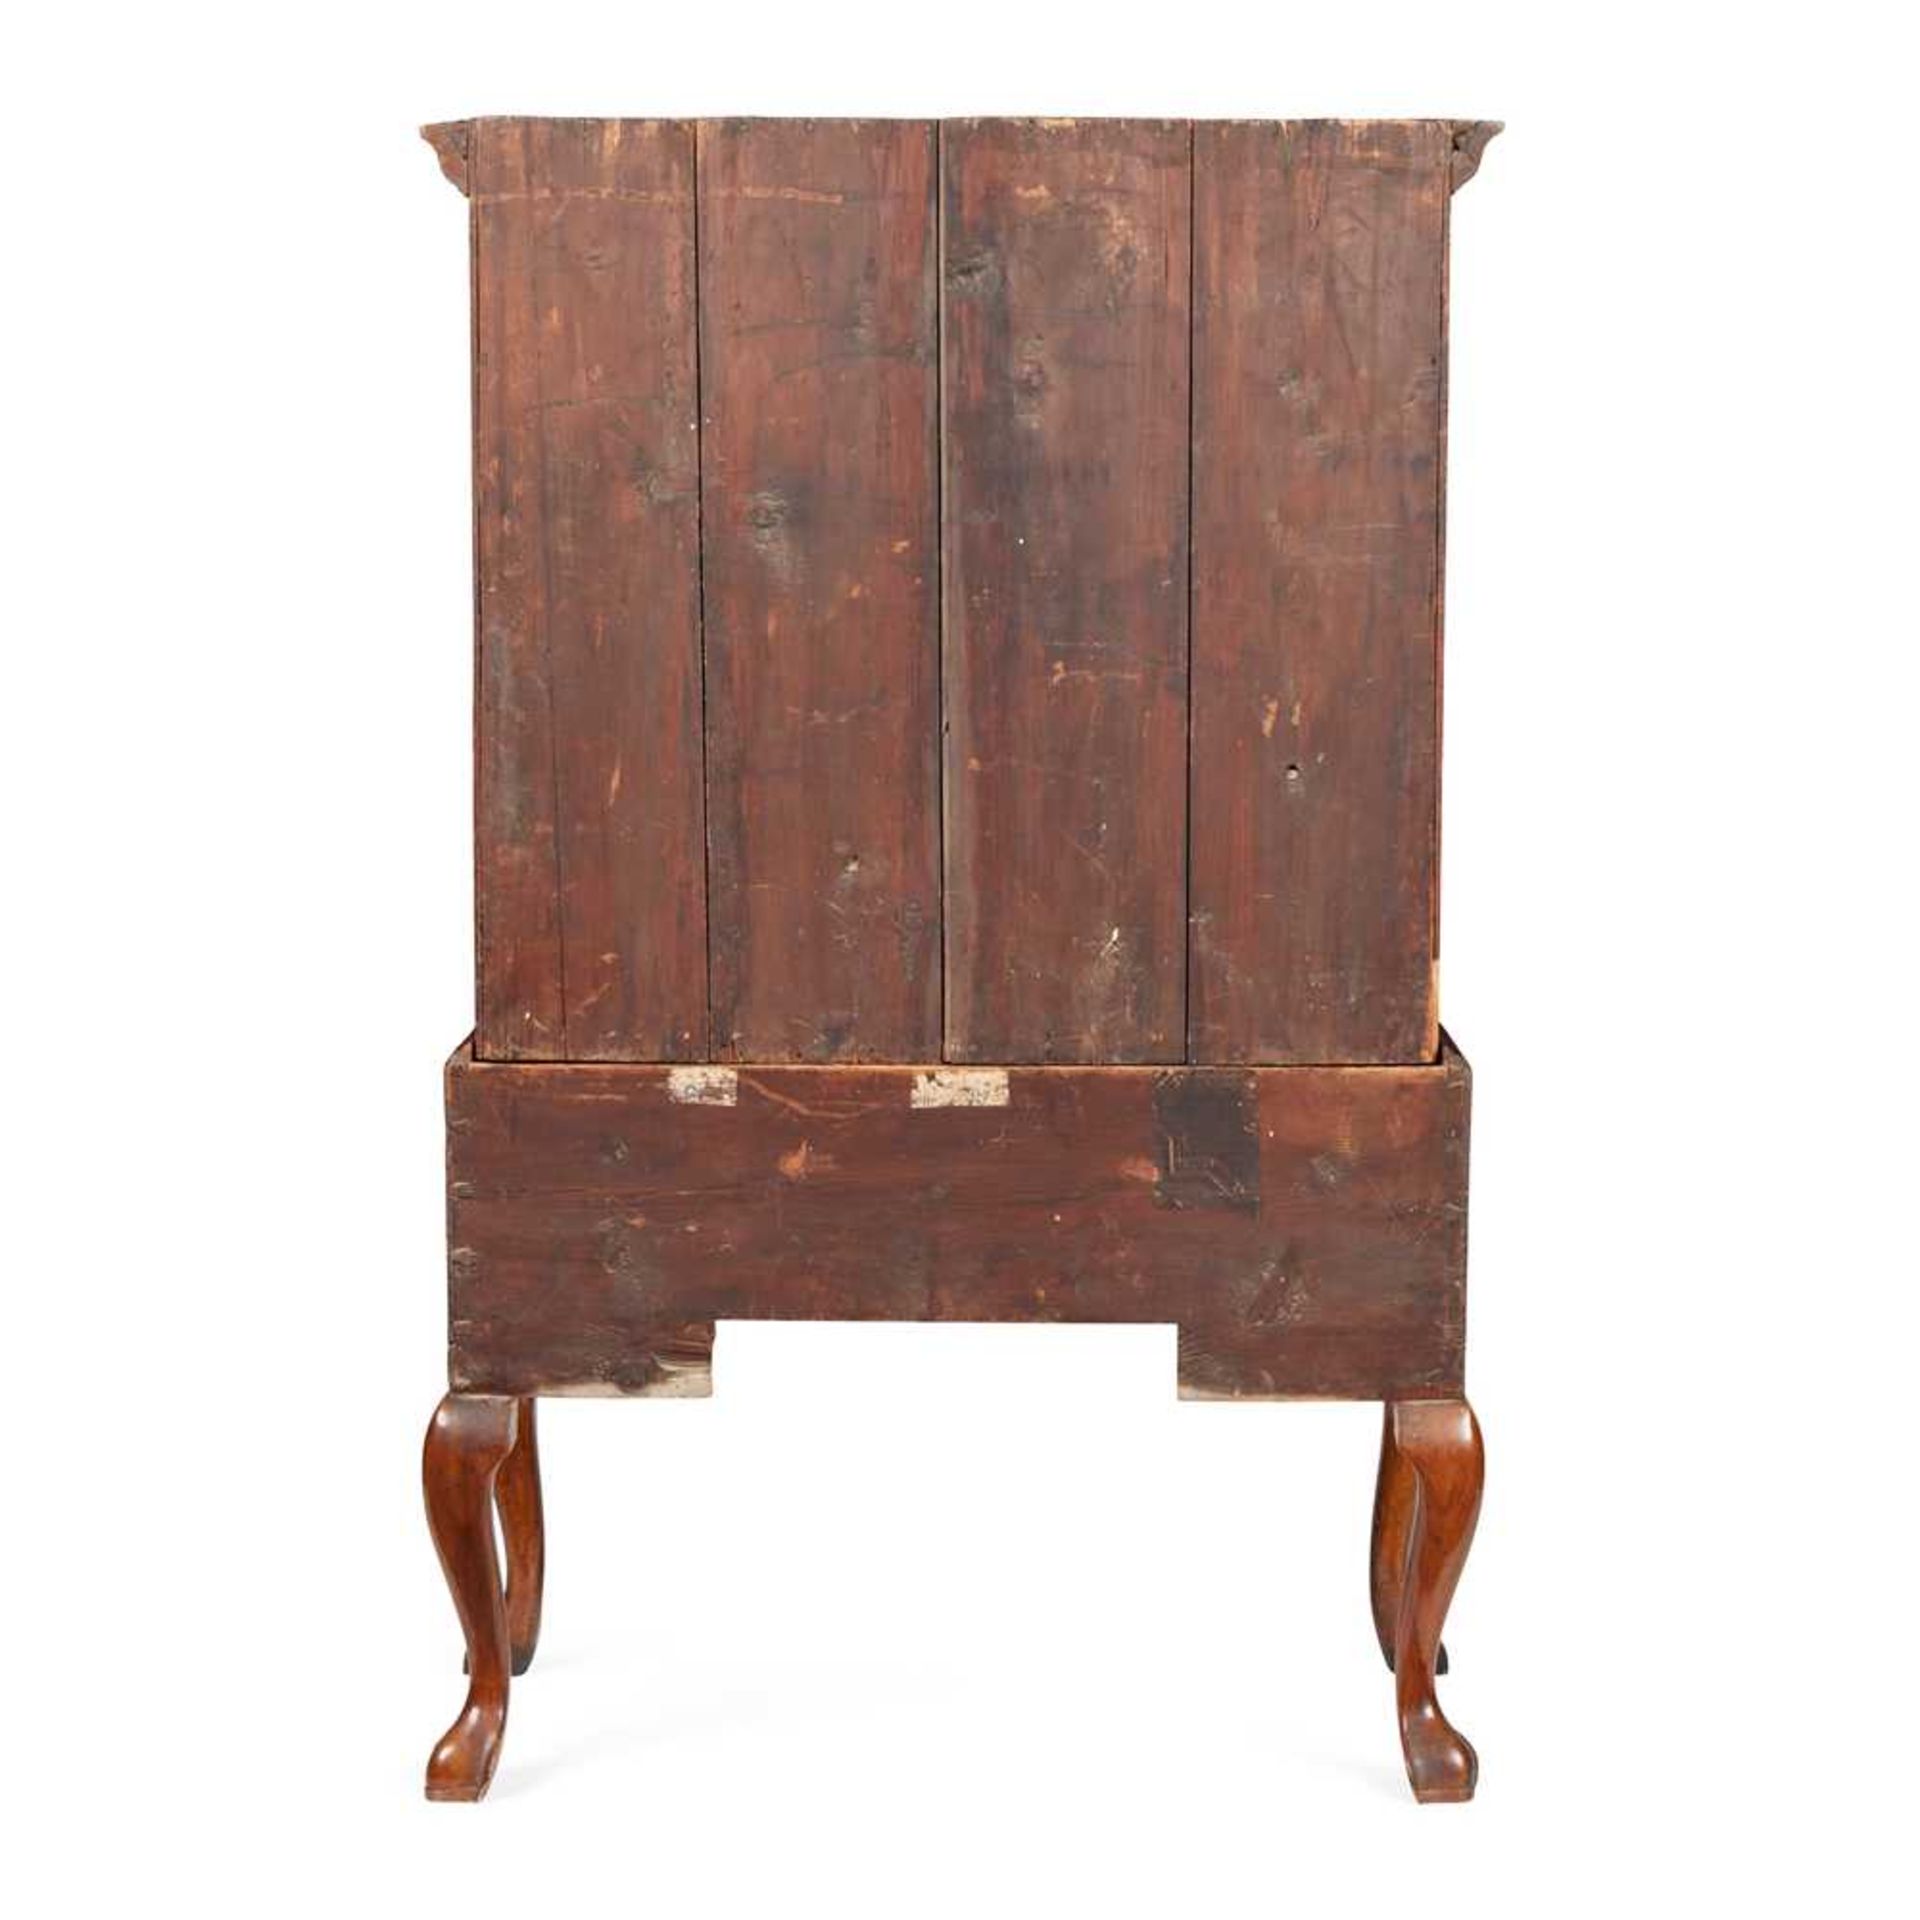 GEORGE II BURR WALNUT AND WALNUT CHEST-ON-STAND EARLY 18TH CENTURY - Image 2 of 2